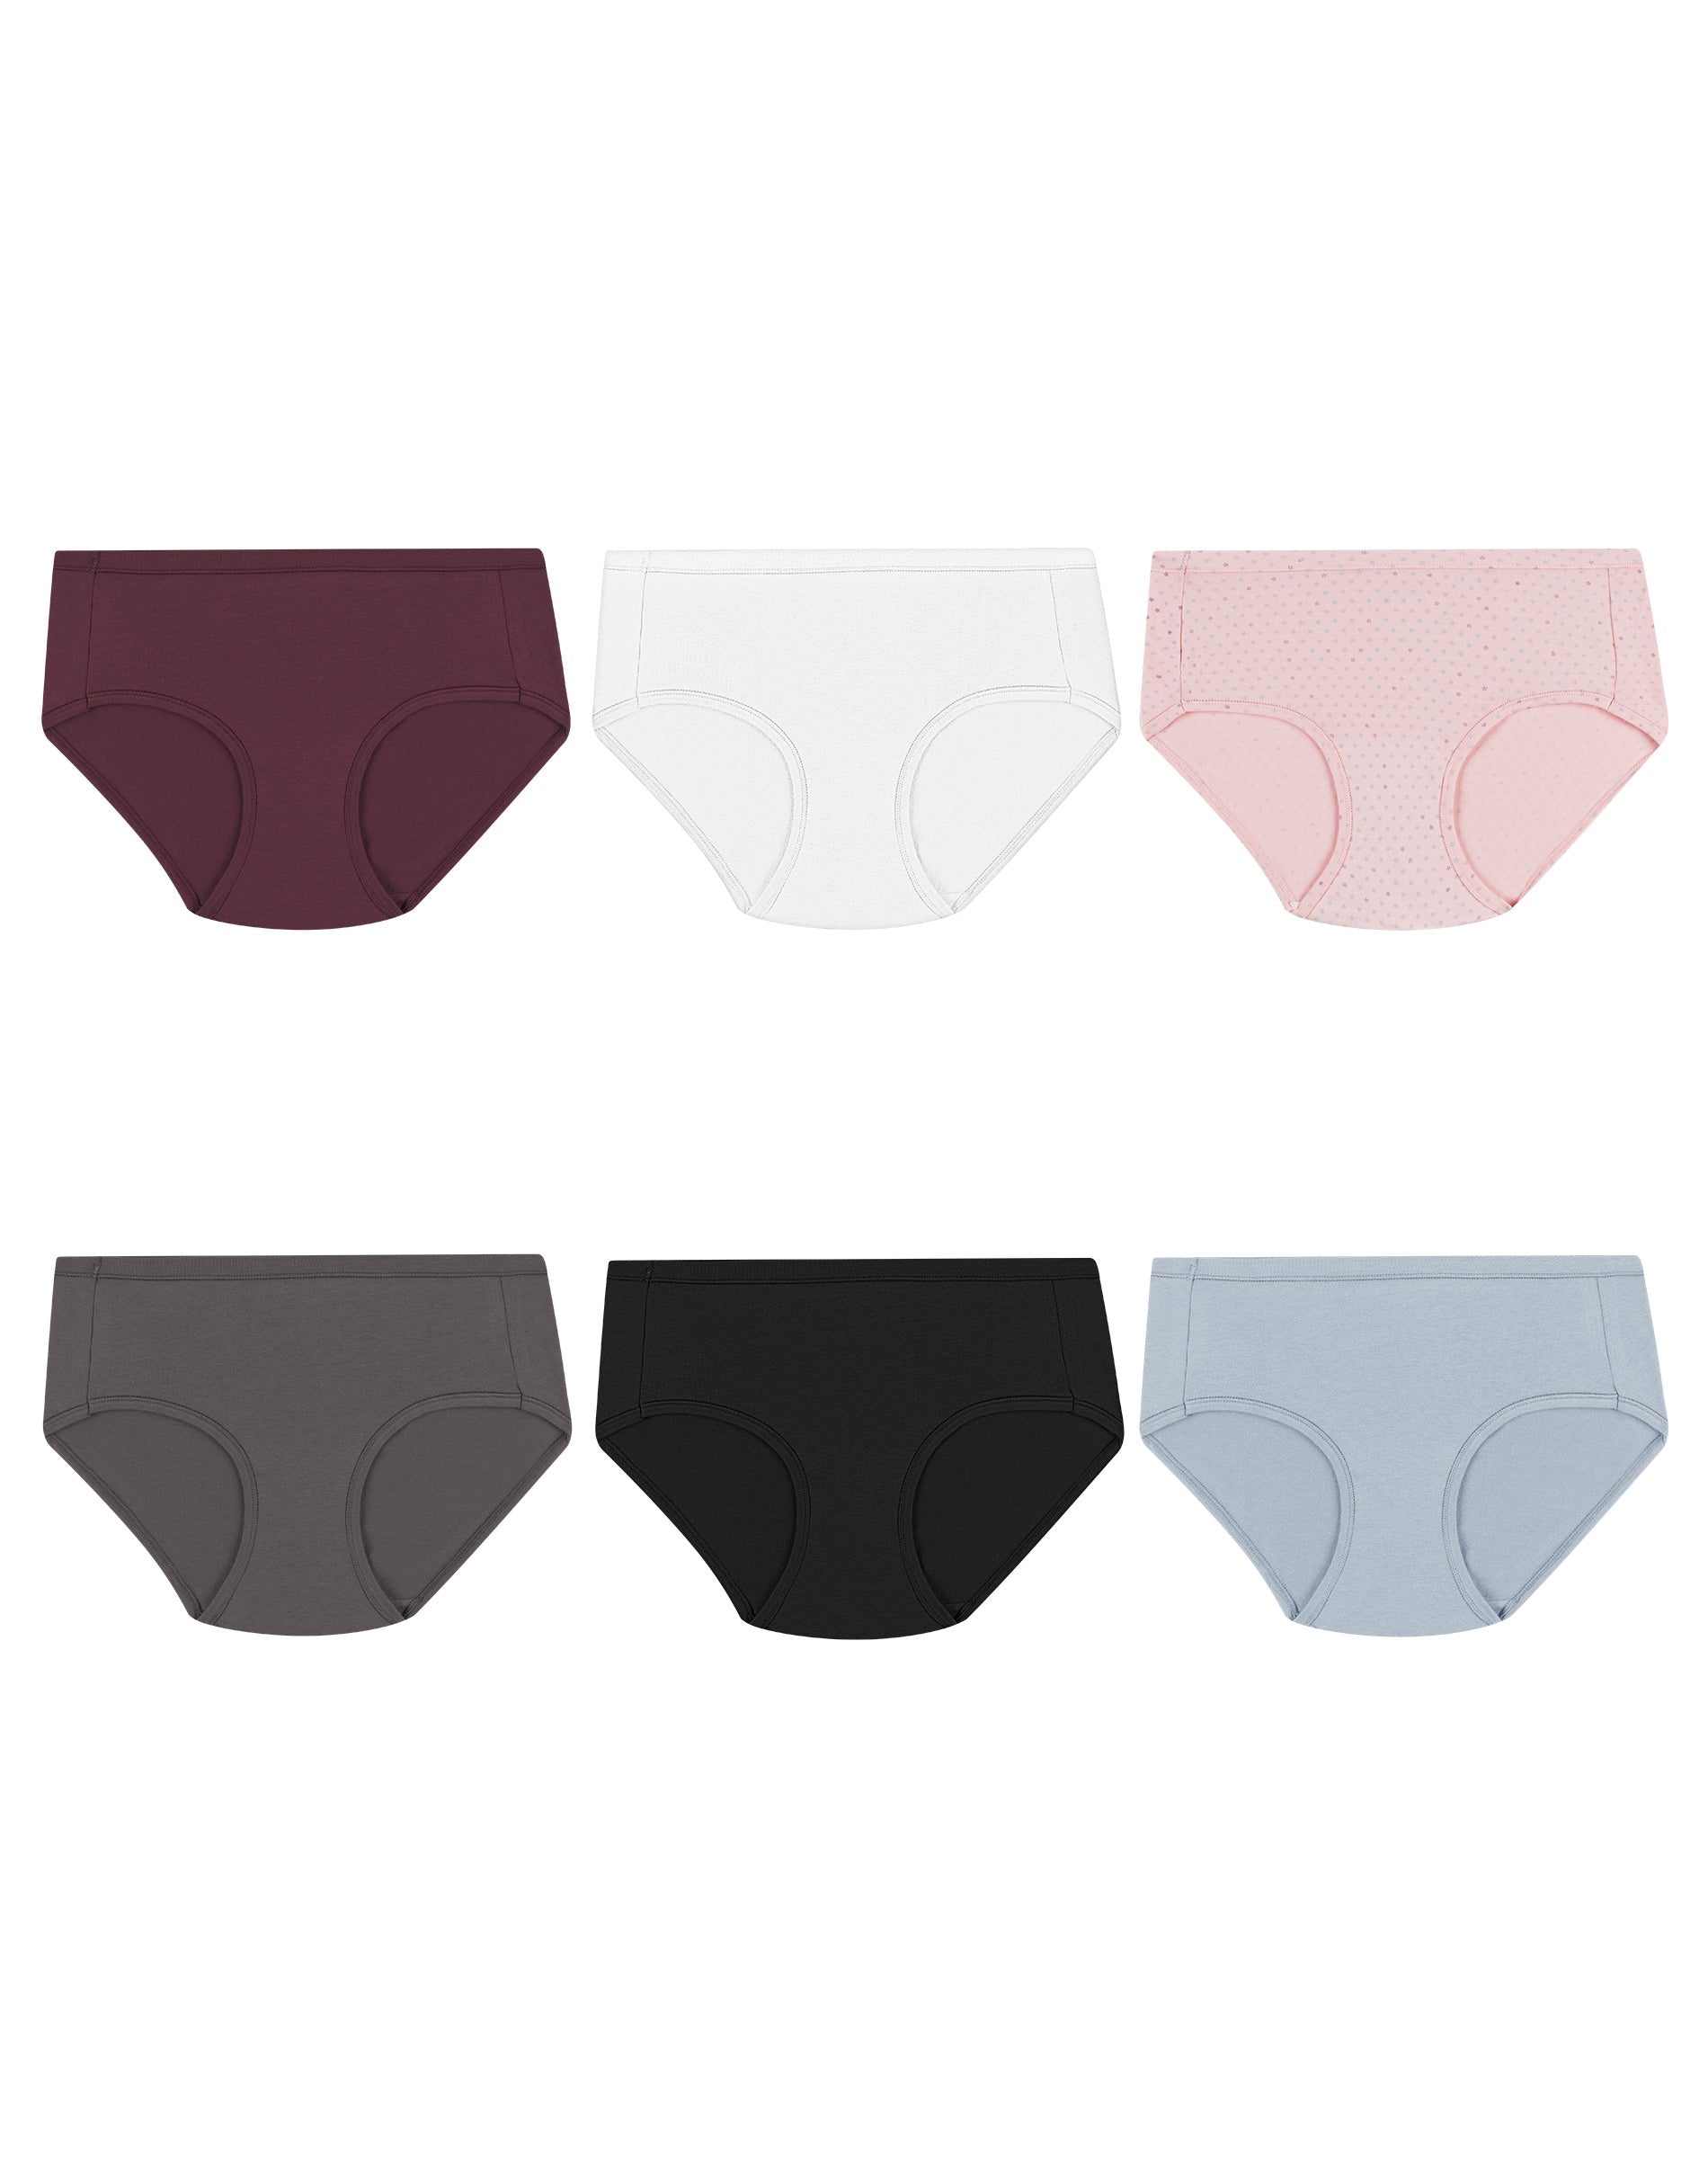 ET39EG - Hanes Women's Cotton Stretch Low Rise Brief With ComfortSoft®  Waistband 6-Pack